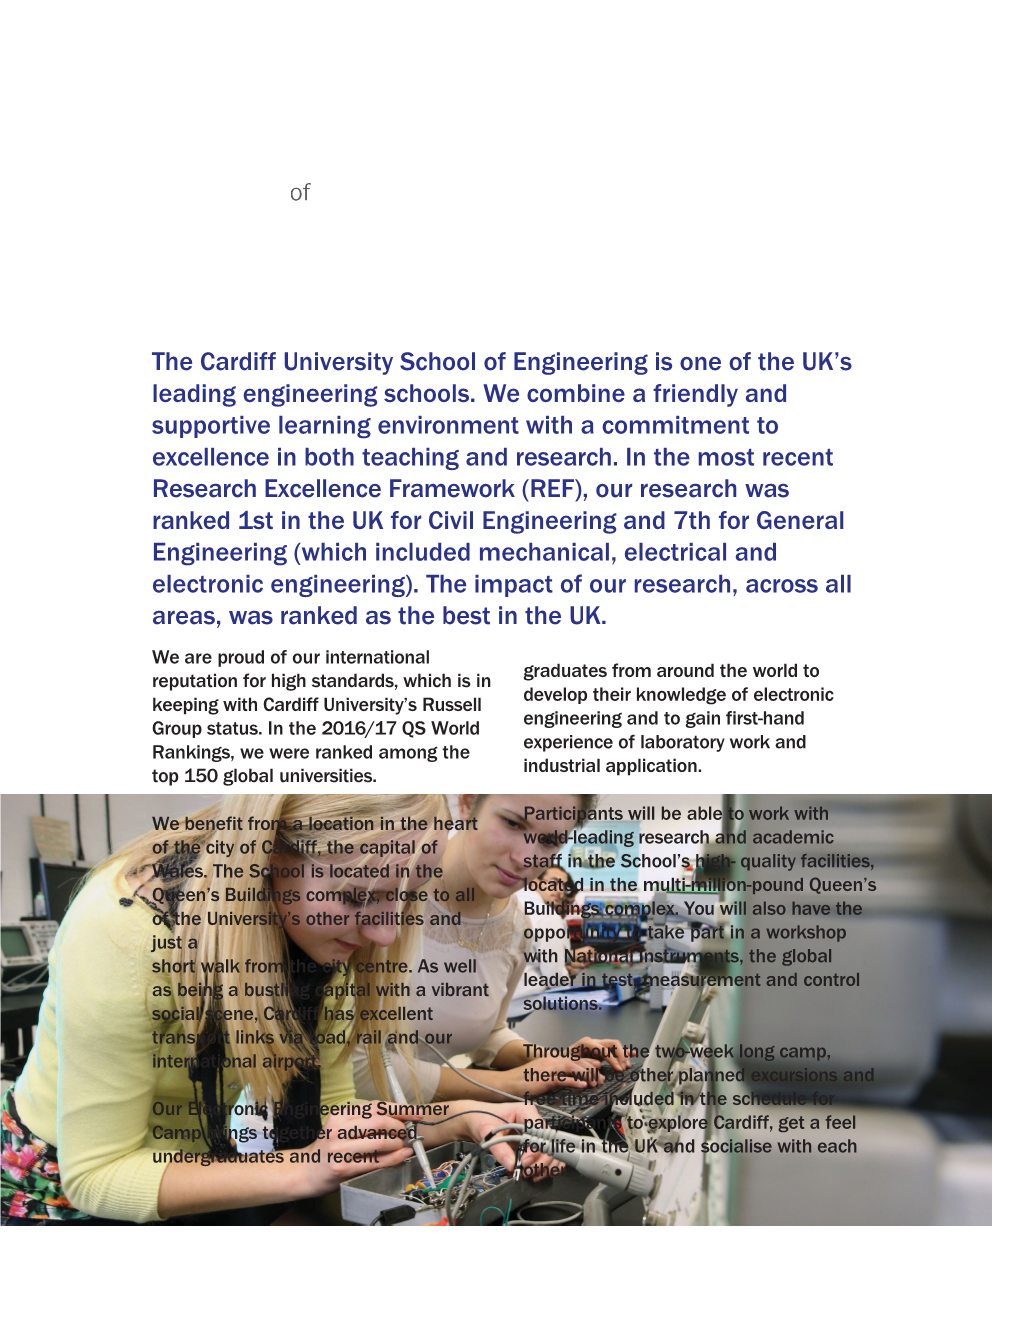 Our Electronic Engineering Summer Camp Brings Together Advanced Undergraduates and Recent